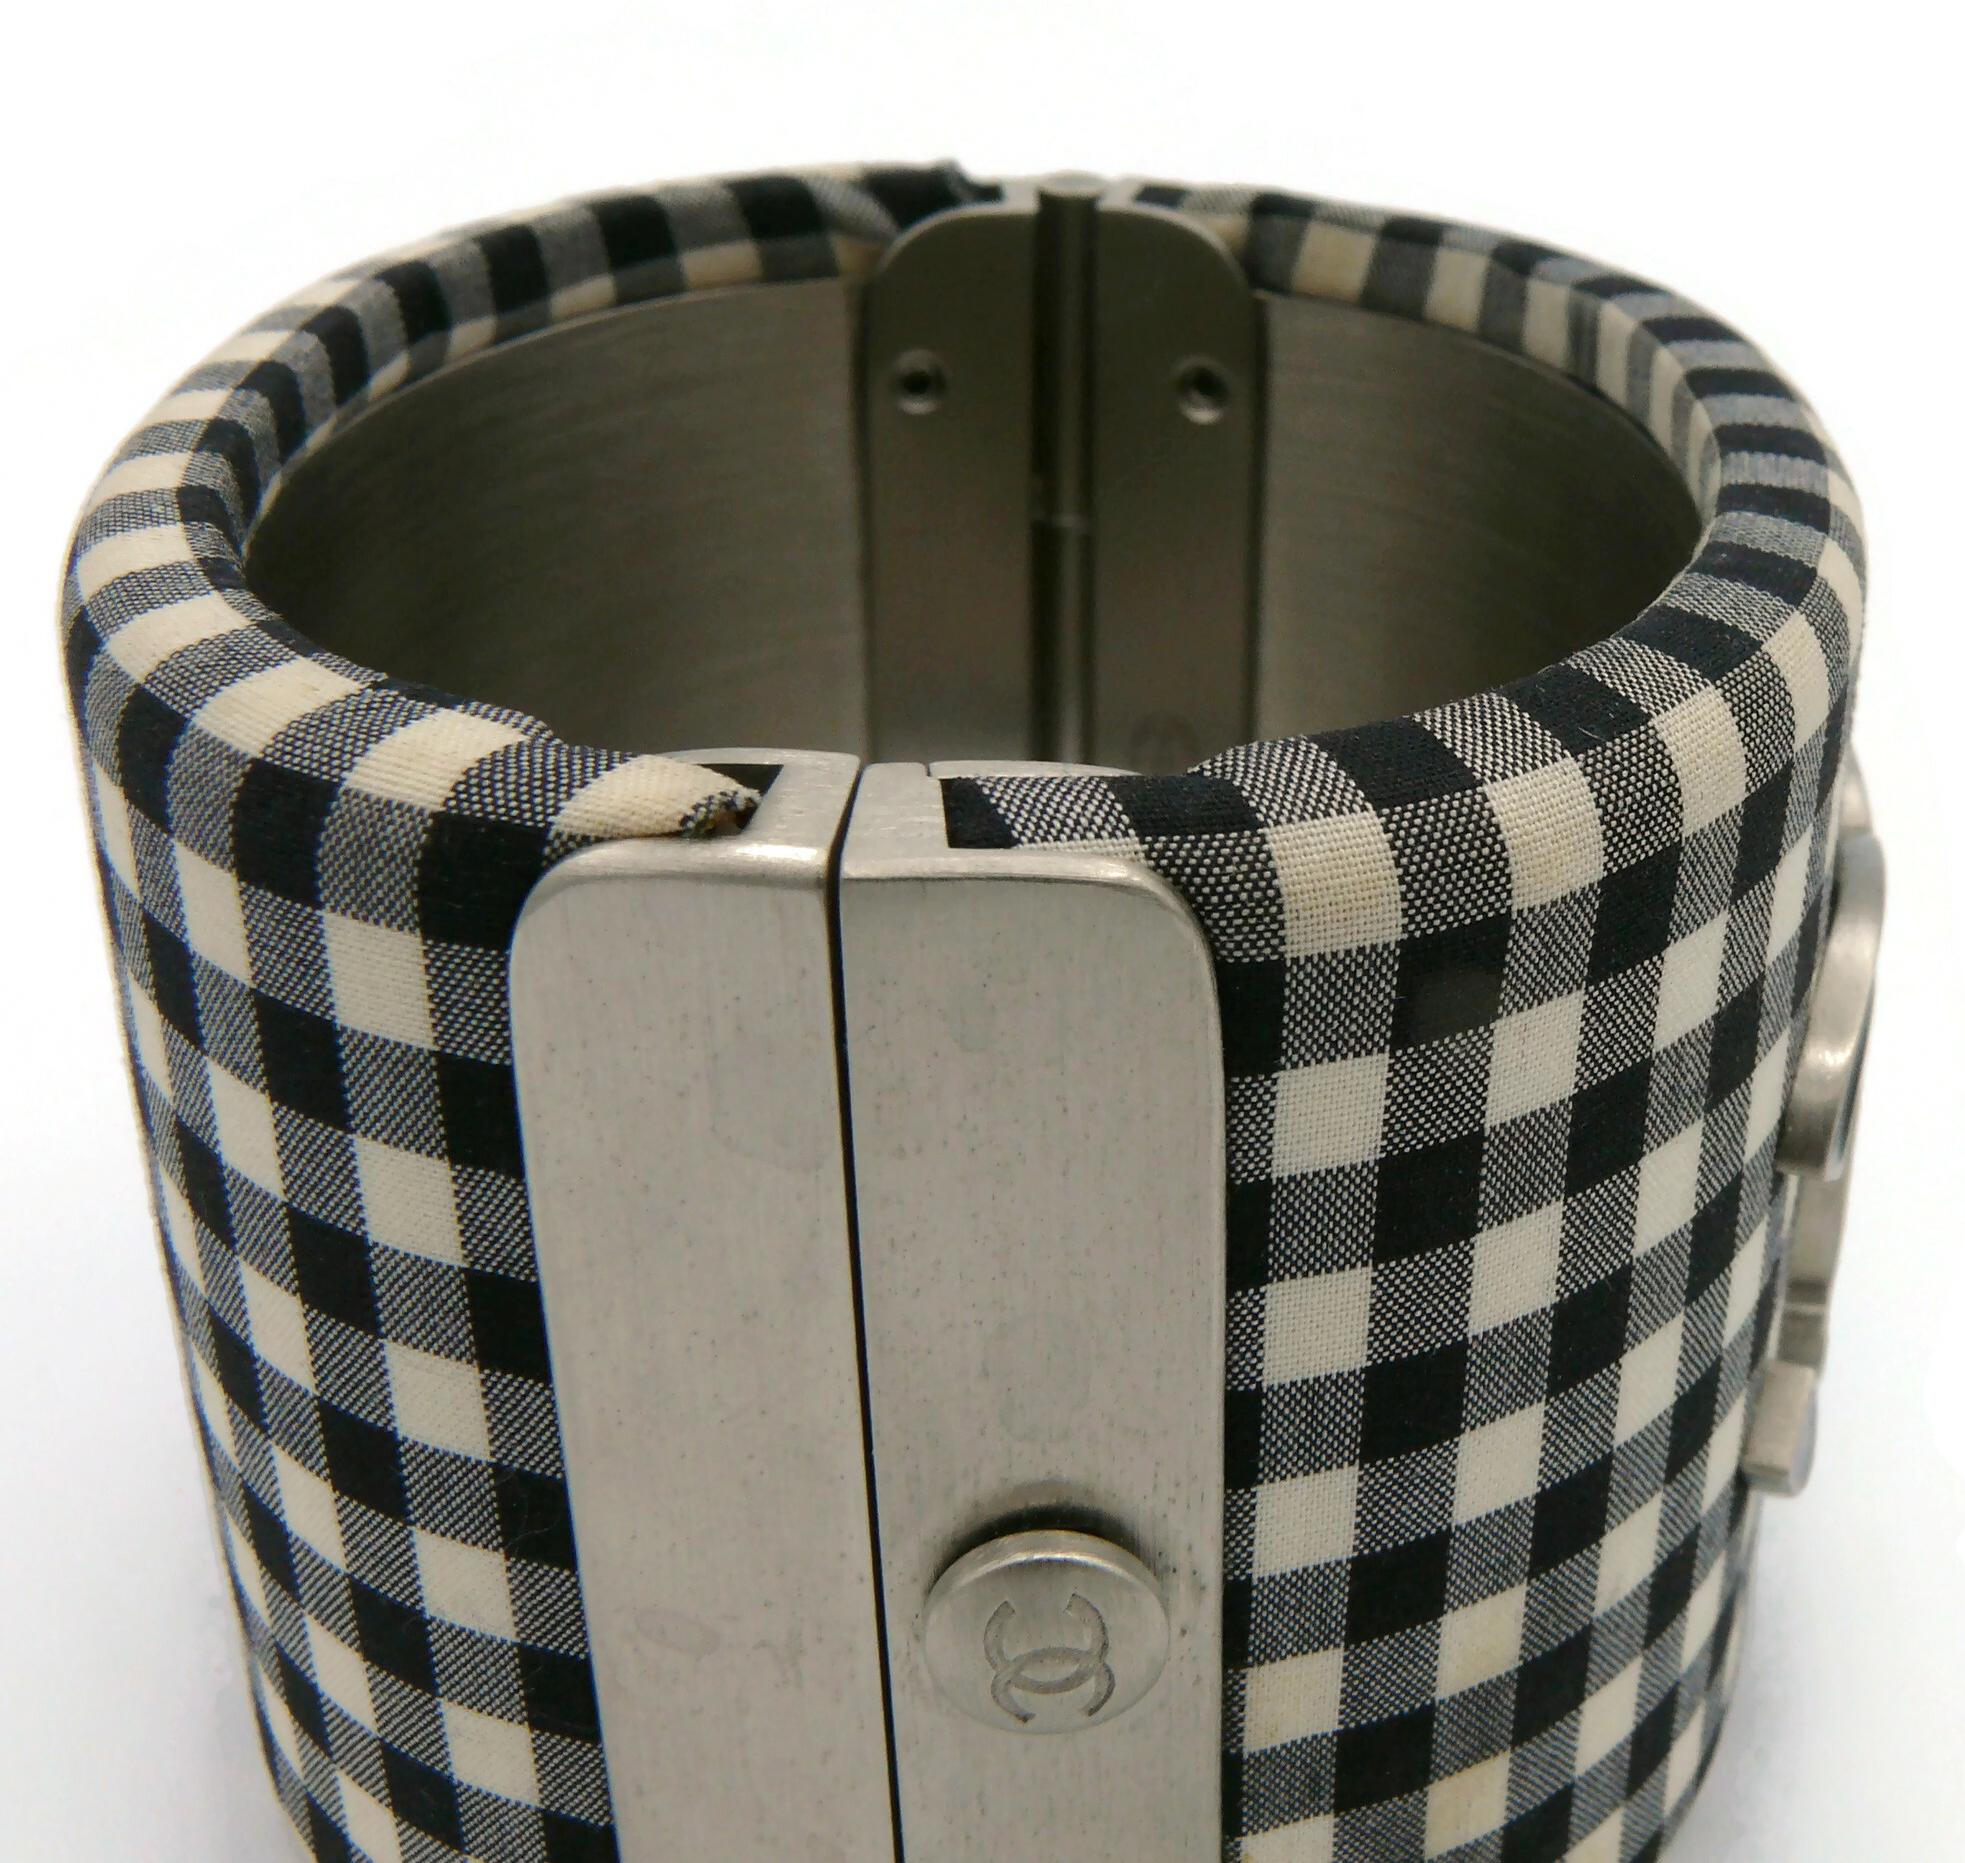 CHANEL Black and White Gingham Vichy Print Cuff Bracelet, Resort Collection 2011 For Sale 7